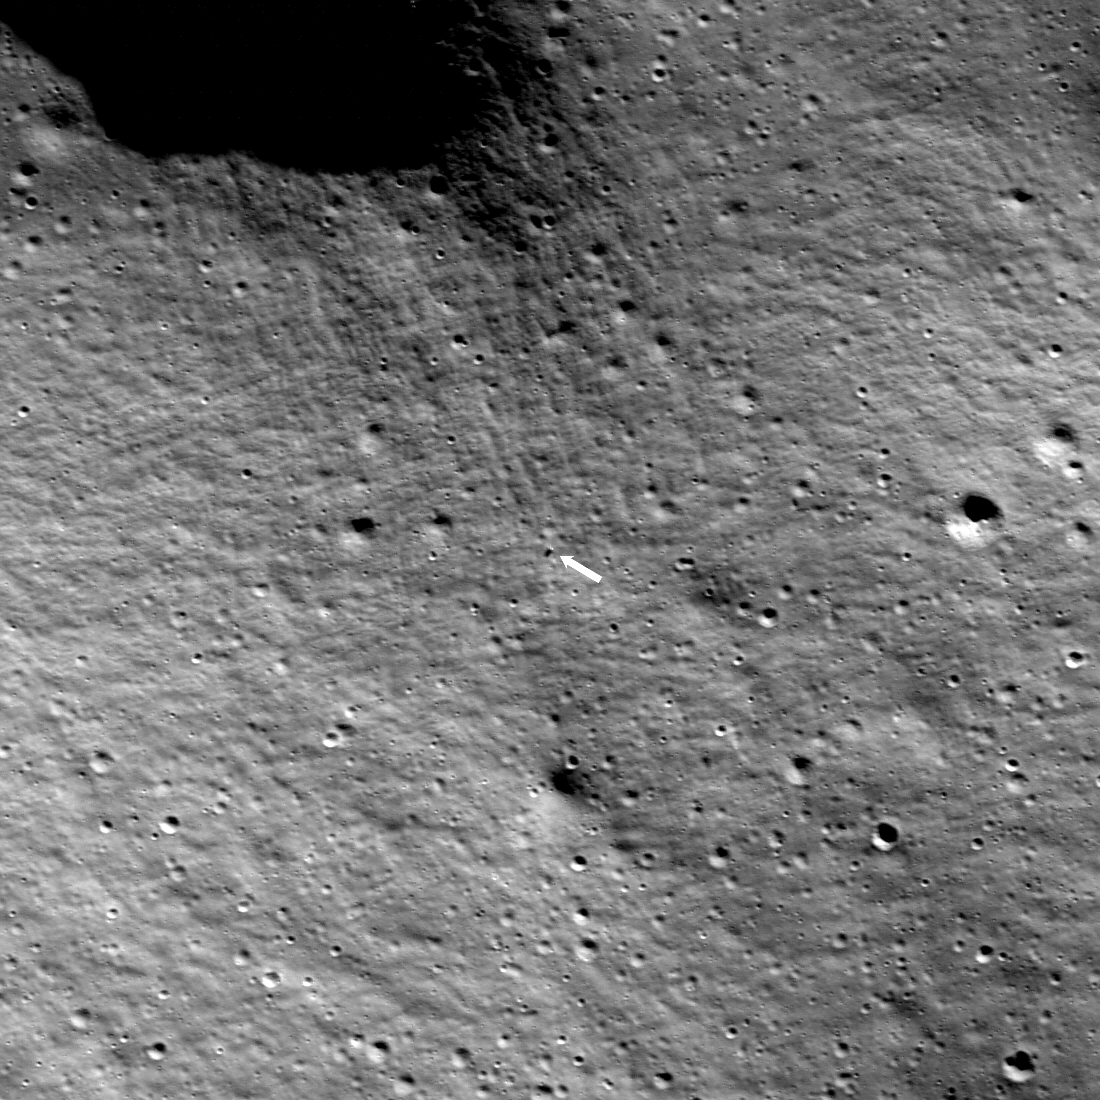 grayscale image of Moon's rocky surface from above, with a small white dot at the center of the frame: IM-1 lander, location indicated with white arrow